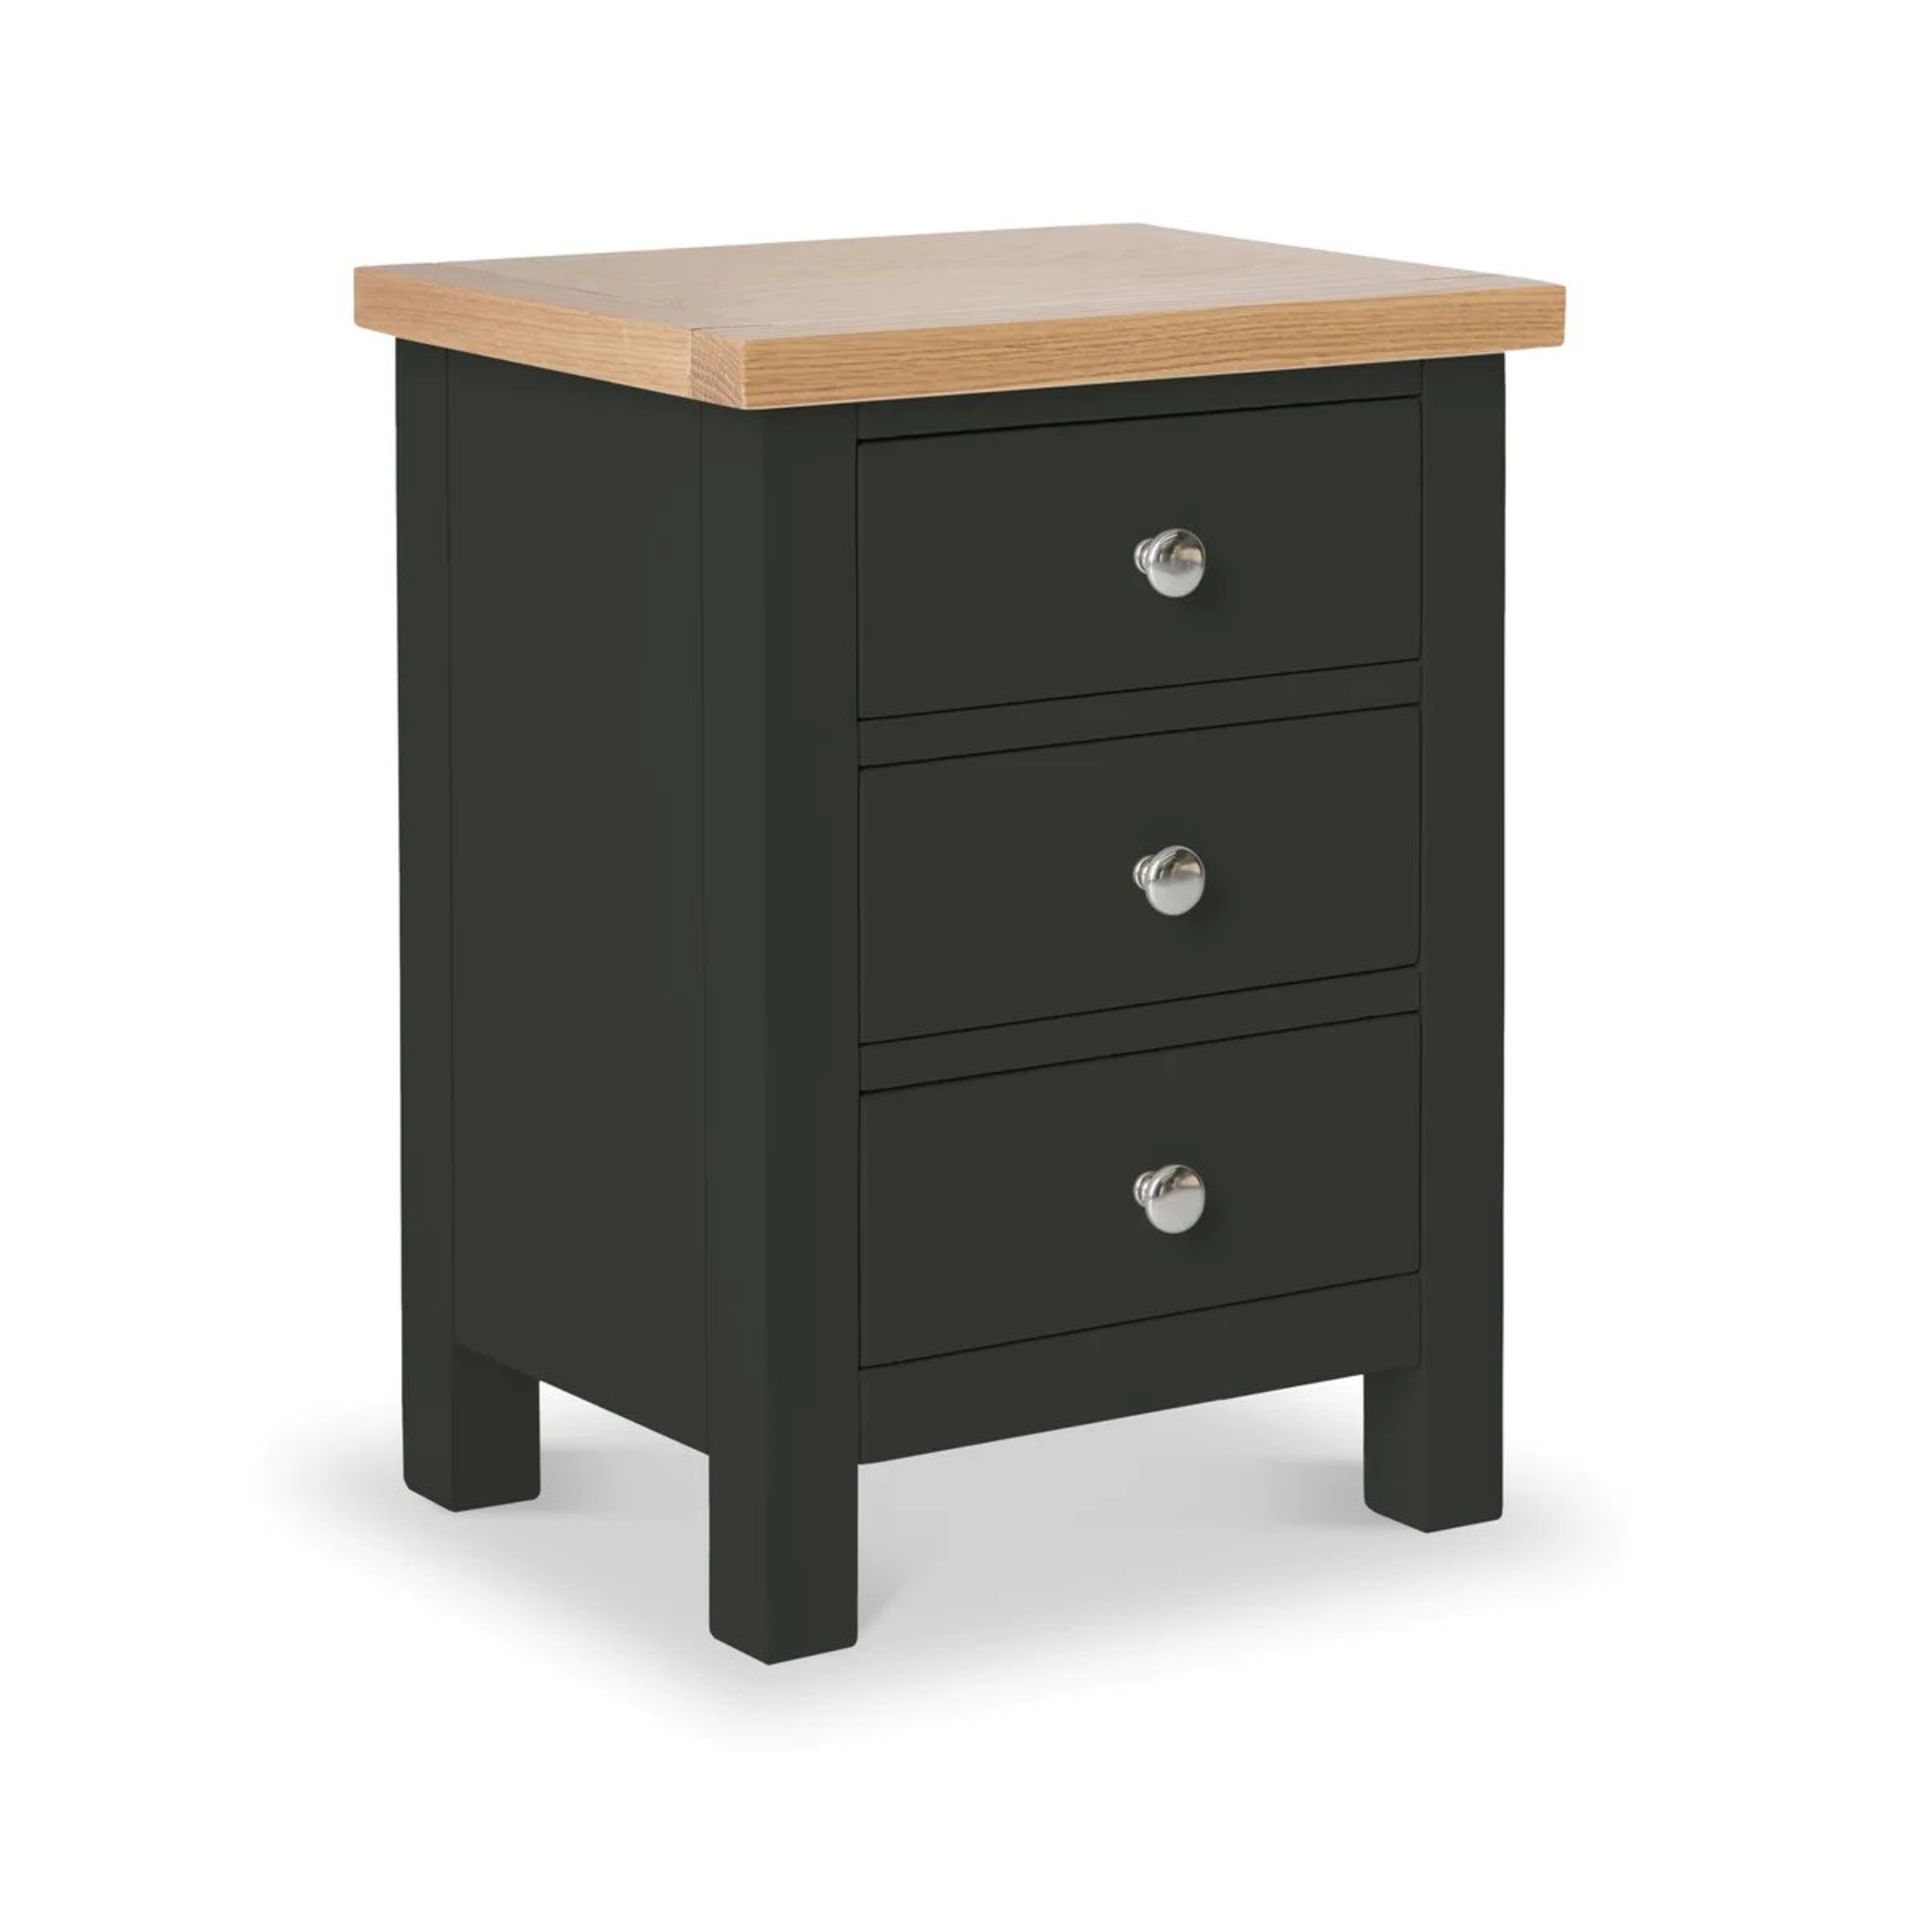 Farrow Bedside Table. RRP £209.99. (7376 132-P6A) SMOKE This great value bedside table is stylish